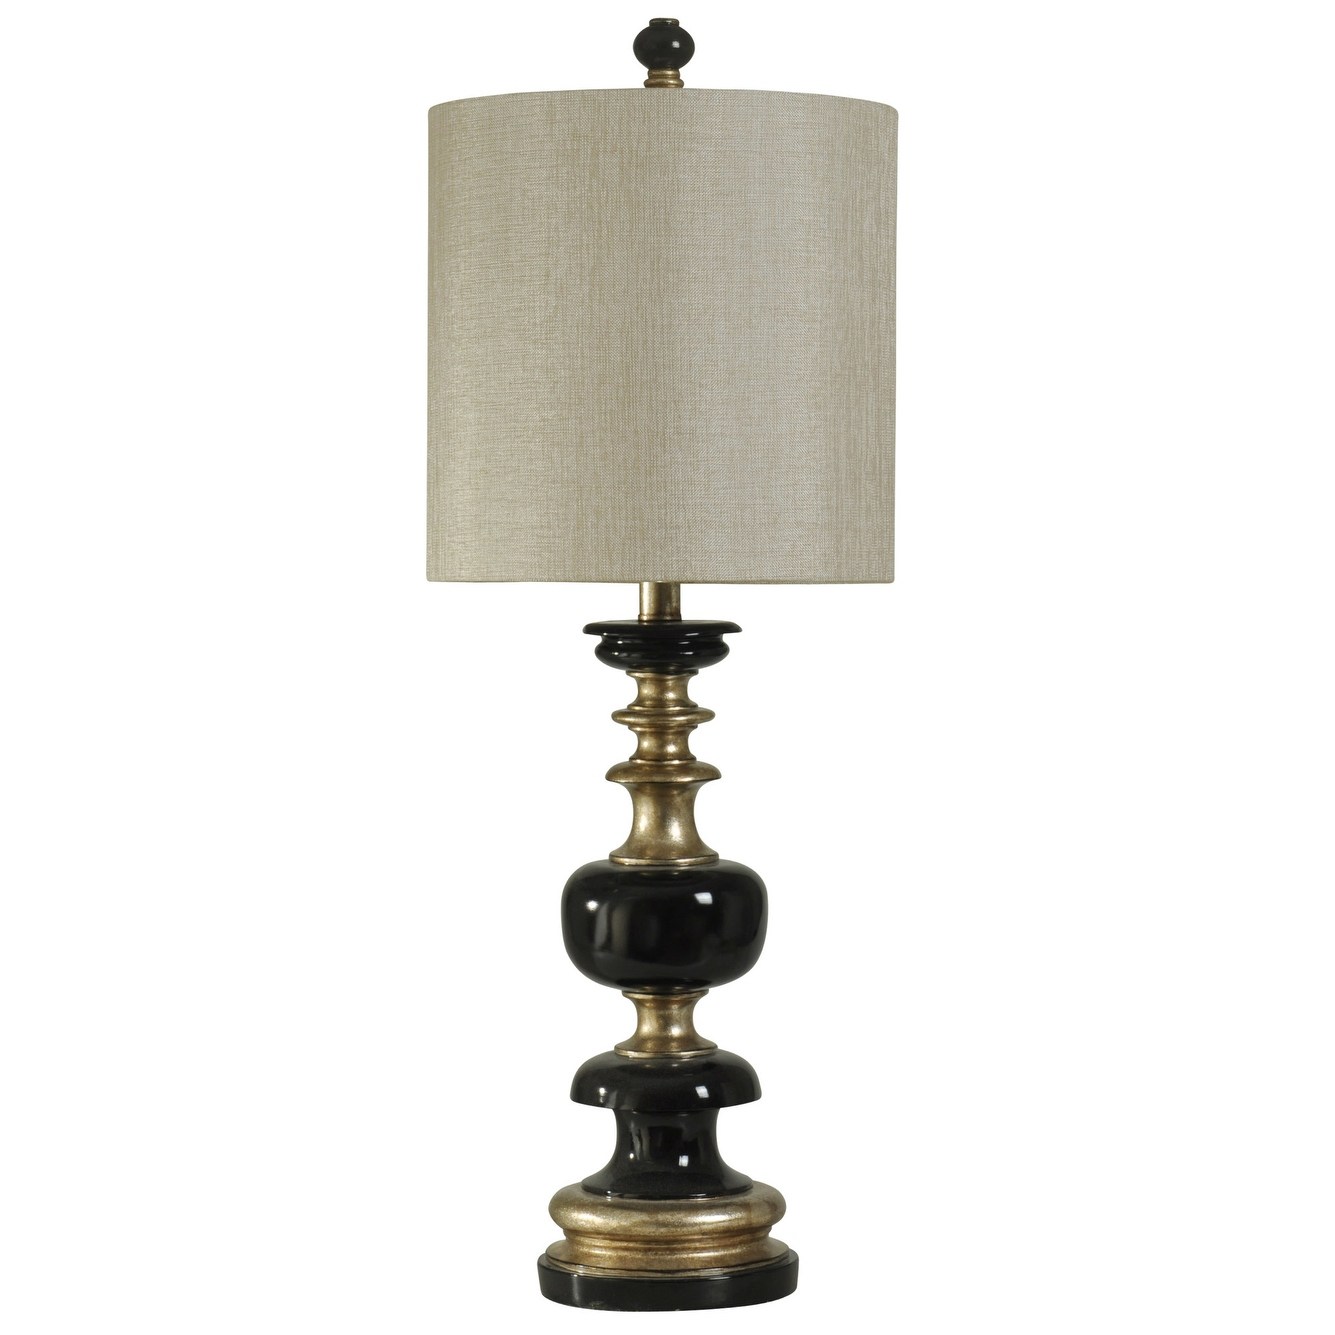 delacora kingston tall accent table lamp with hardback fabric shade lamps black gold free shipping today pottery barn flooring and marble end dining behind couch ashley stewart